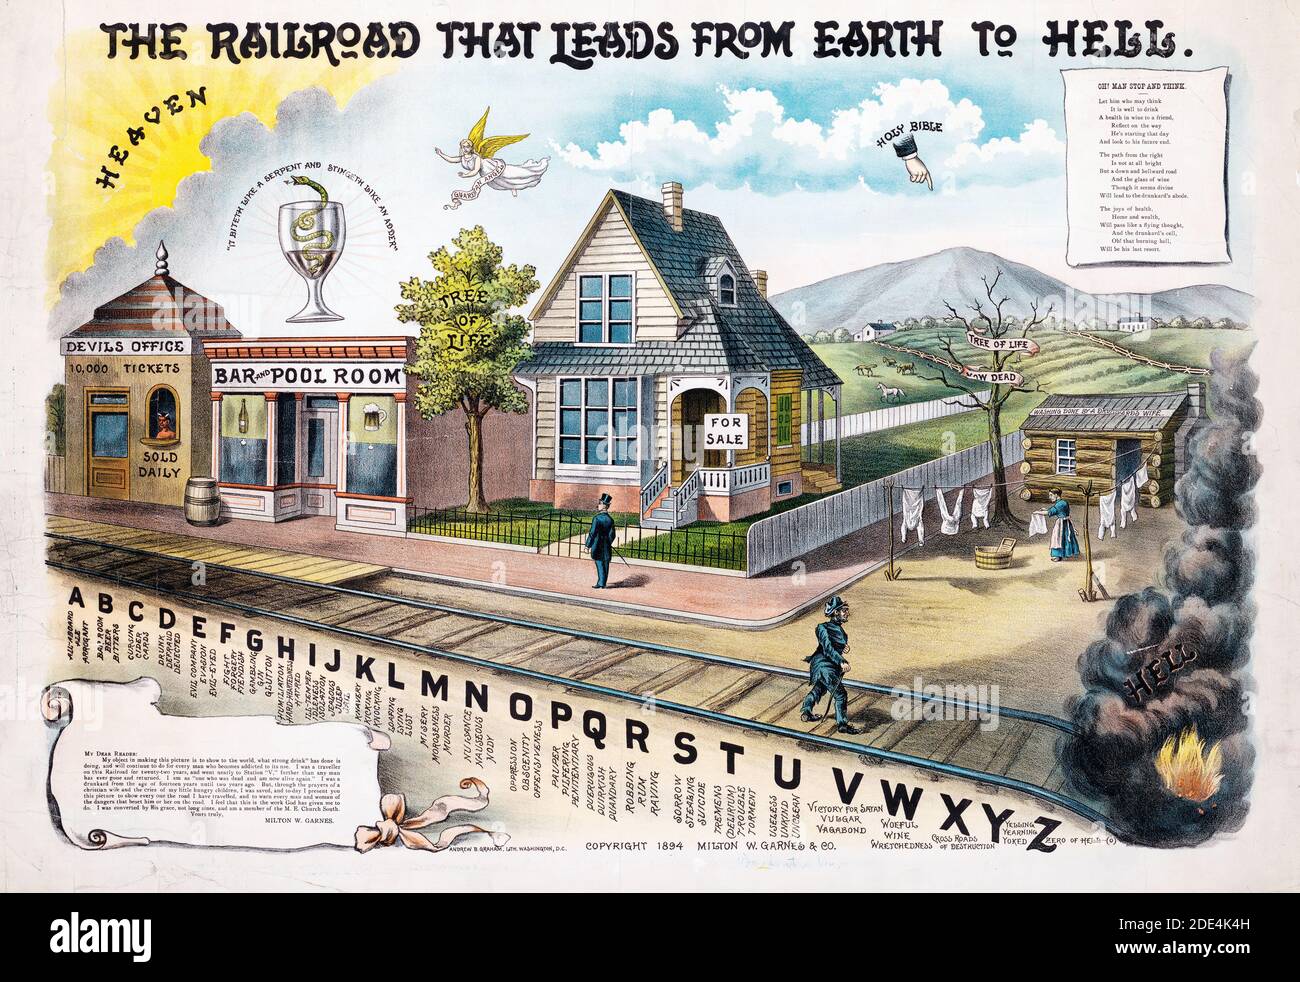 Print shows a drunkard on the 'railroad' to ruin which passes the 'Devils Office' and the 'Bar and Pool Room', a healthy 'Tree of Live' over which hovers a 'Guardian Angel', followed by a house 'For Sale', then, as the end of the road approaches 'Hell', the 'Tree of Life Now Dead' and a small log cabin labeled 'Washing Done by a Drunkards Wife.' Stock Photo